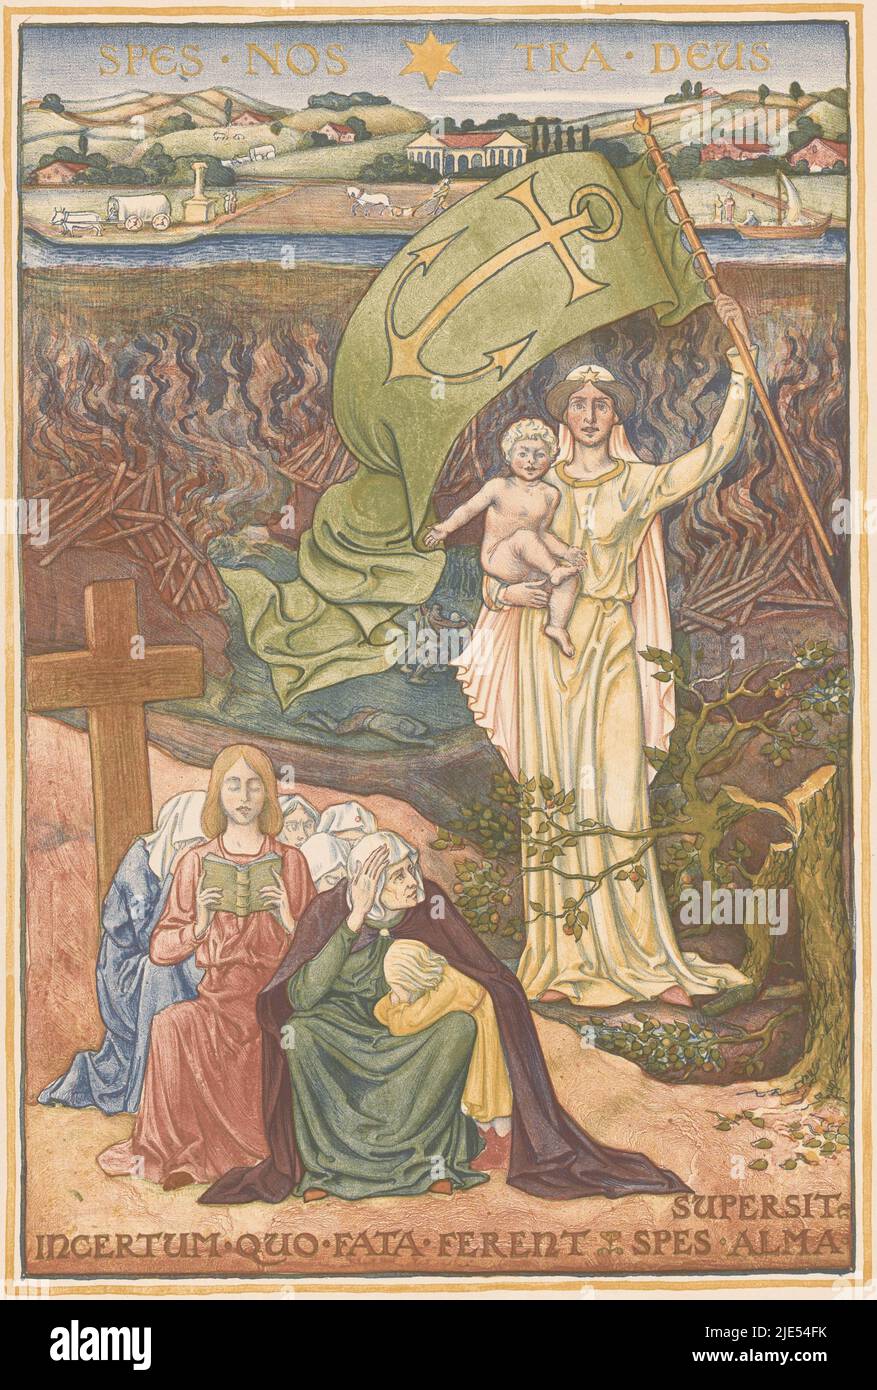 A woman with a child in her arms is holding a banner with an anchor symbolising hope. She is in a devastated and burning area. At her feet lies a snapped tree with fruits. In the foreground on the left, a group of women are squatting in front of a cross. In the background a Transvaal landscape with farmers. At the top the inscription 'Spes nostra Deus' (God is our hope), at the bottom the inscription 'Incertum quo fata ferent spes alma supersit' (uncertain is where fate will take us, may hope remain), Transvaal print (original title)., print maker: Antoon Derkinderen, 1902, paper, h 432 mm × w Stock Photo